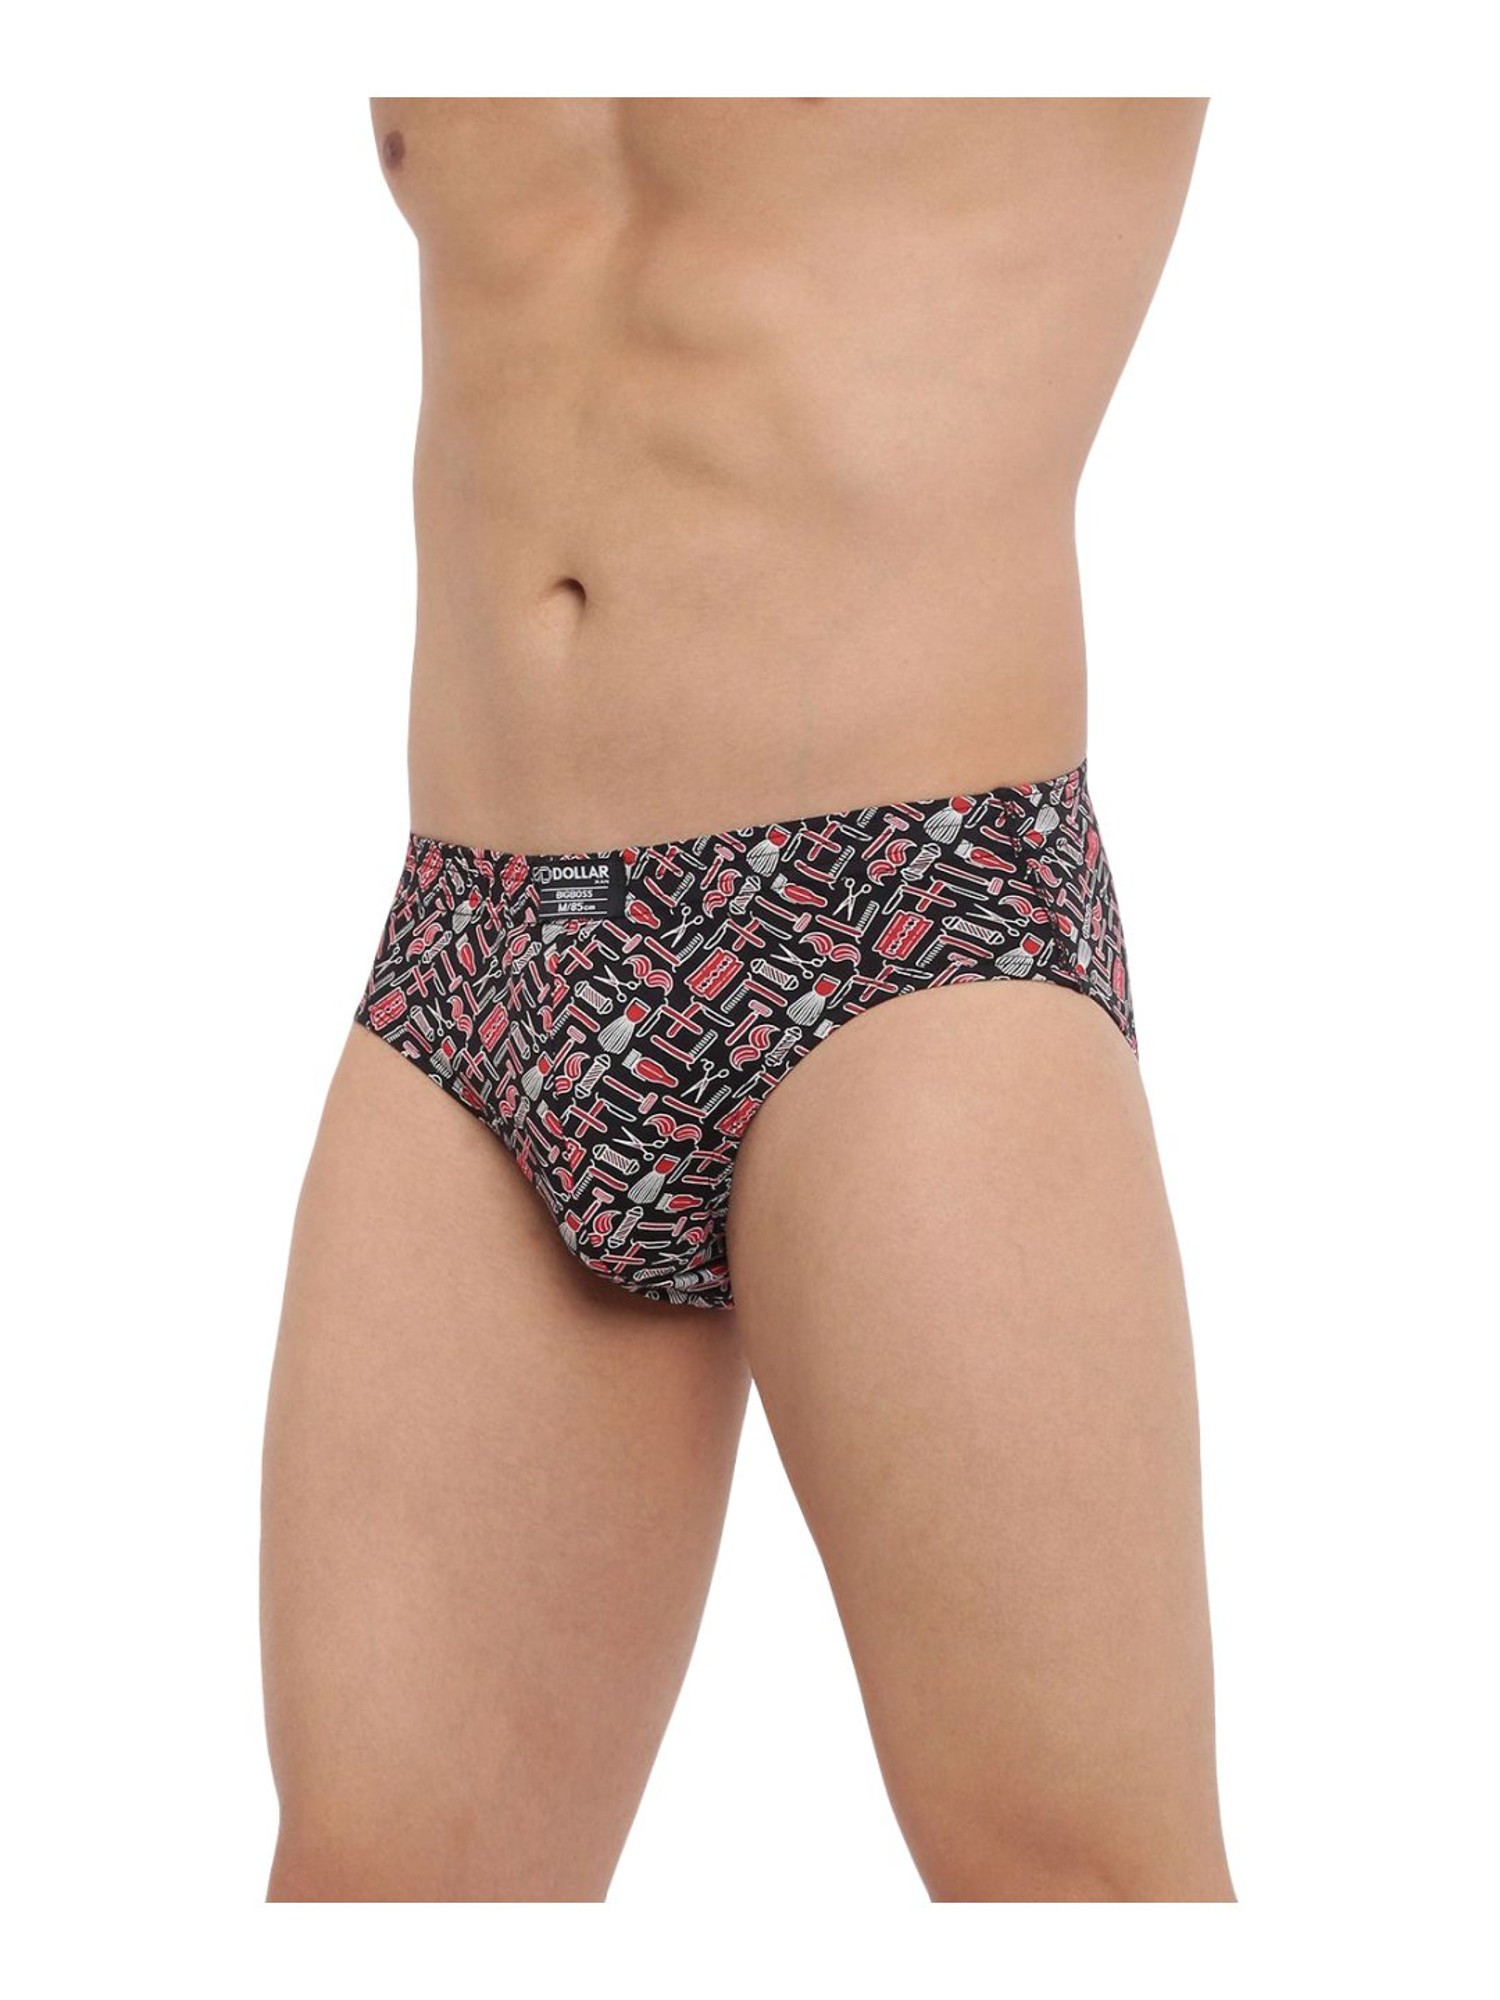 Buy Dollar Bigboss Assorted Color Cotton Printed Briefs (Pack Of 2